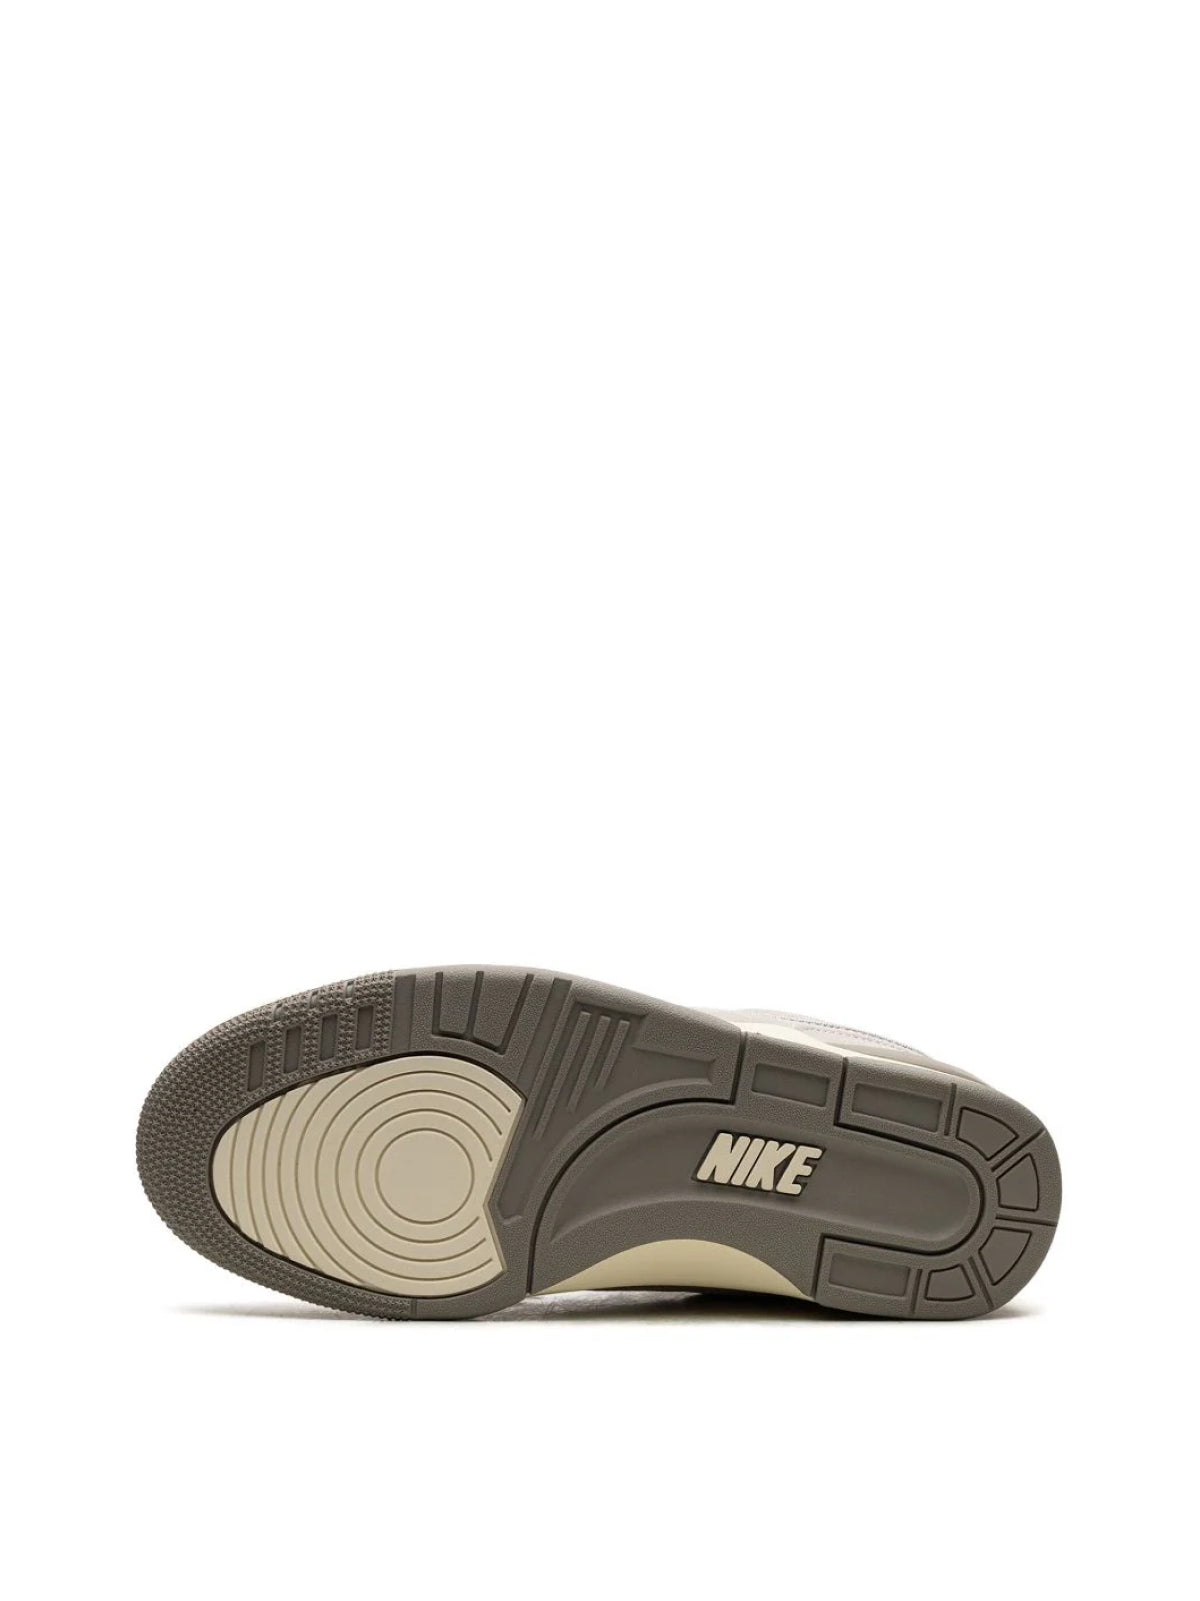 Nike-OUTLET-SALE-Alpha Force AAF88 Sneakers-ARCHIVIST